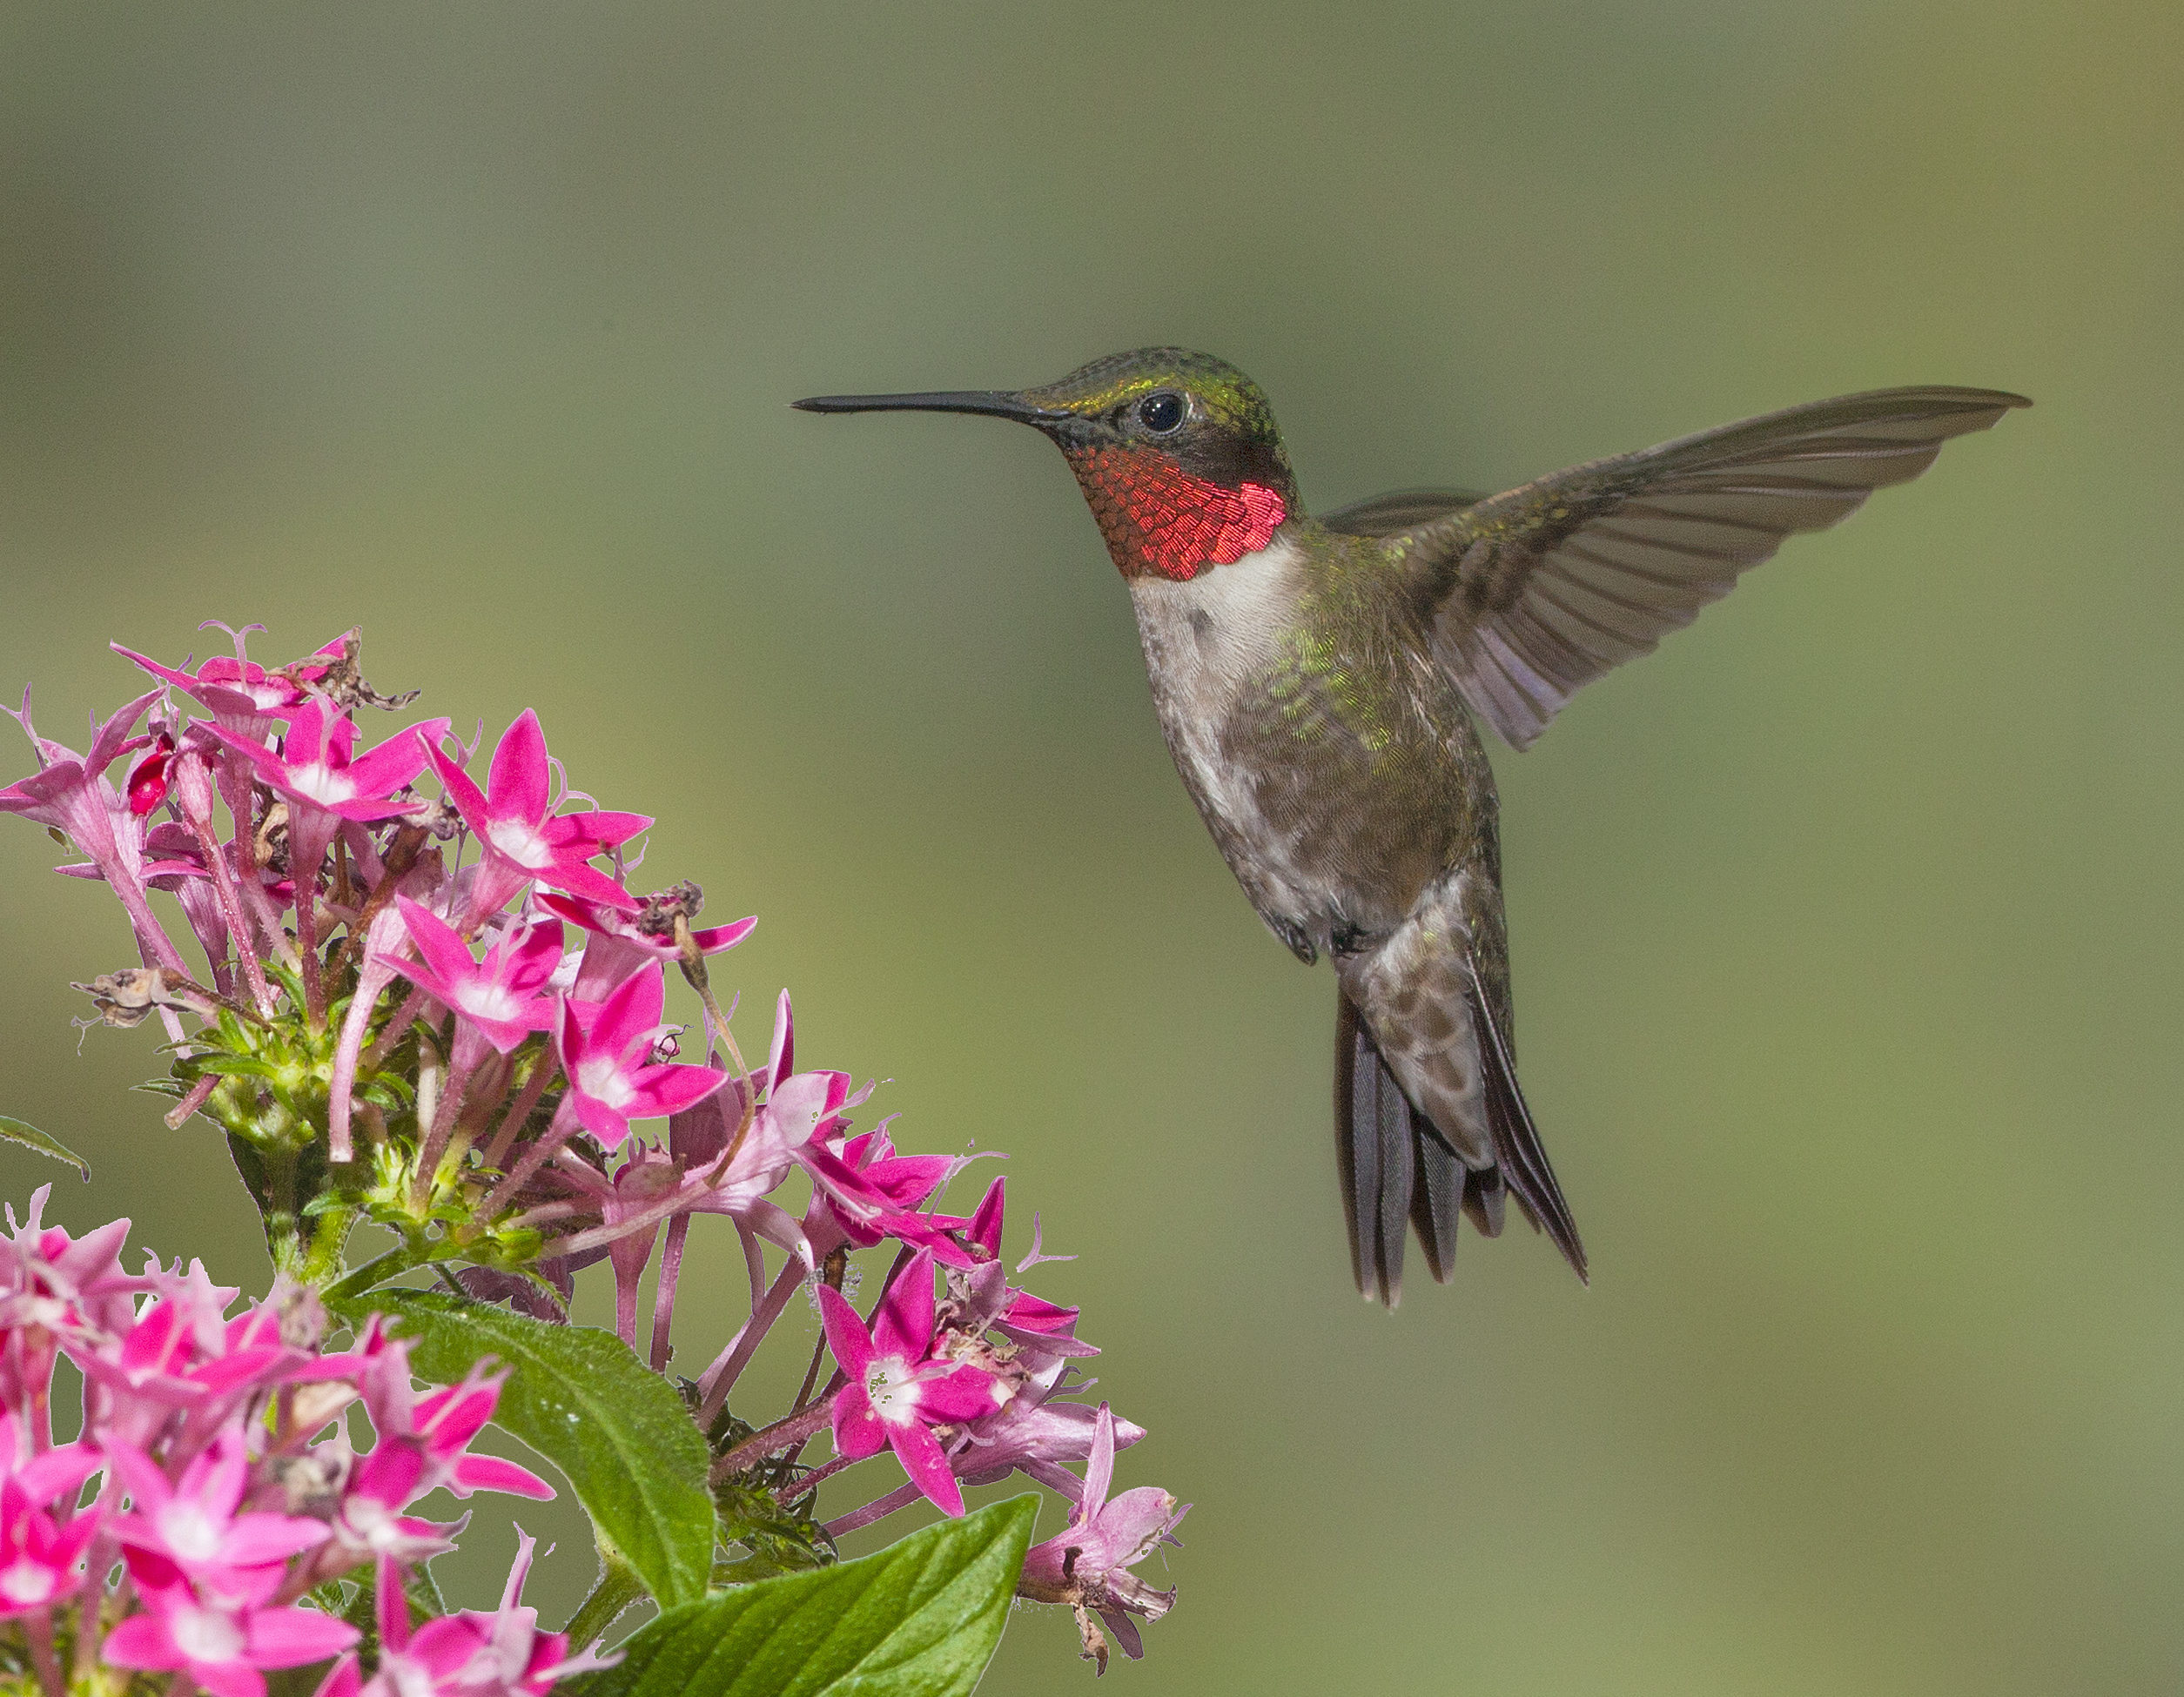 These hummingbirds weigh less than a nickel, migrate 1,000s of miles ...